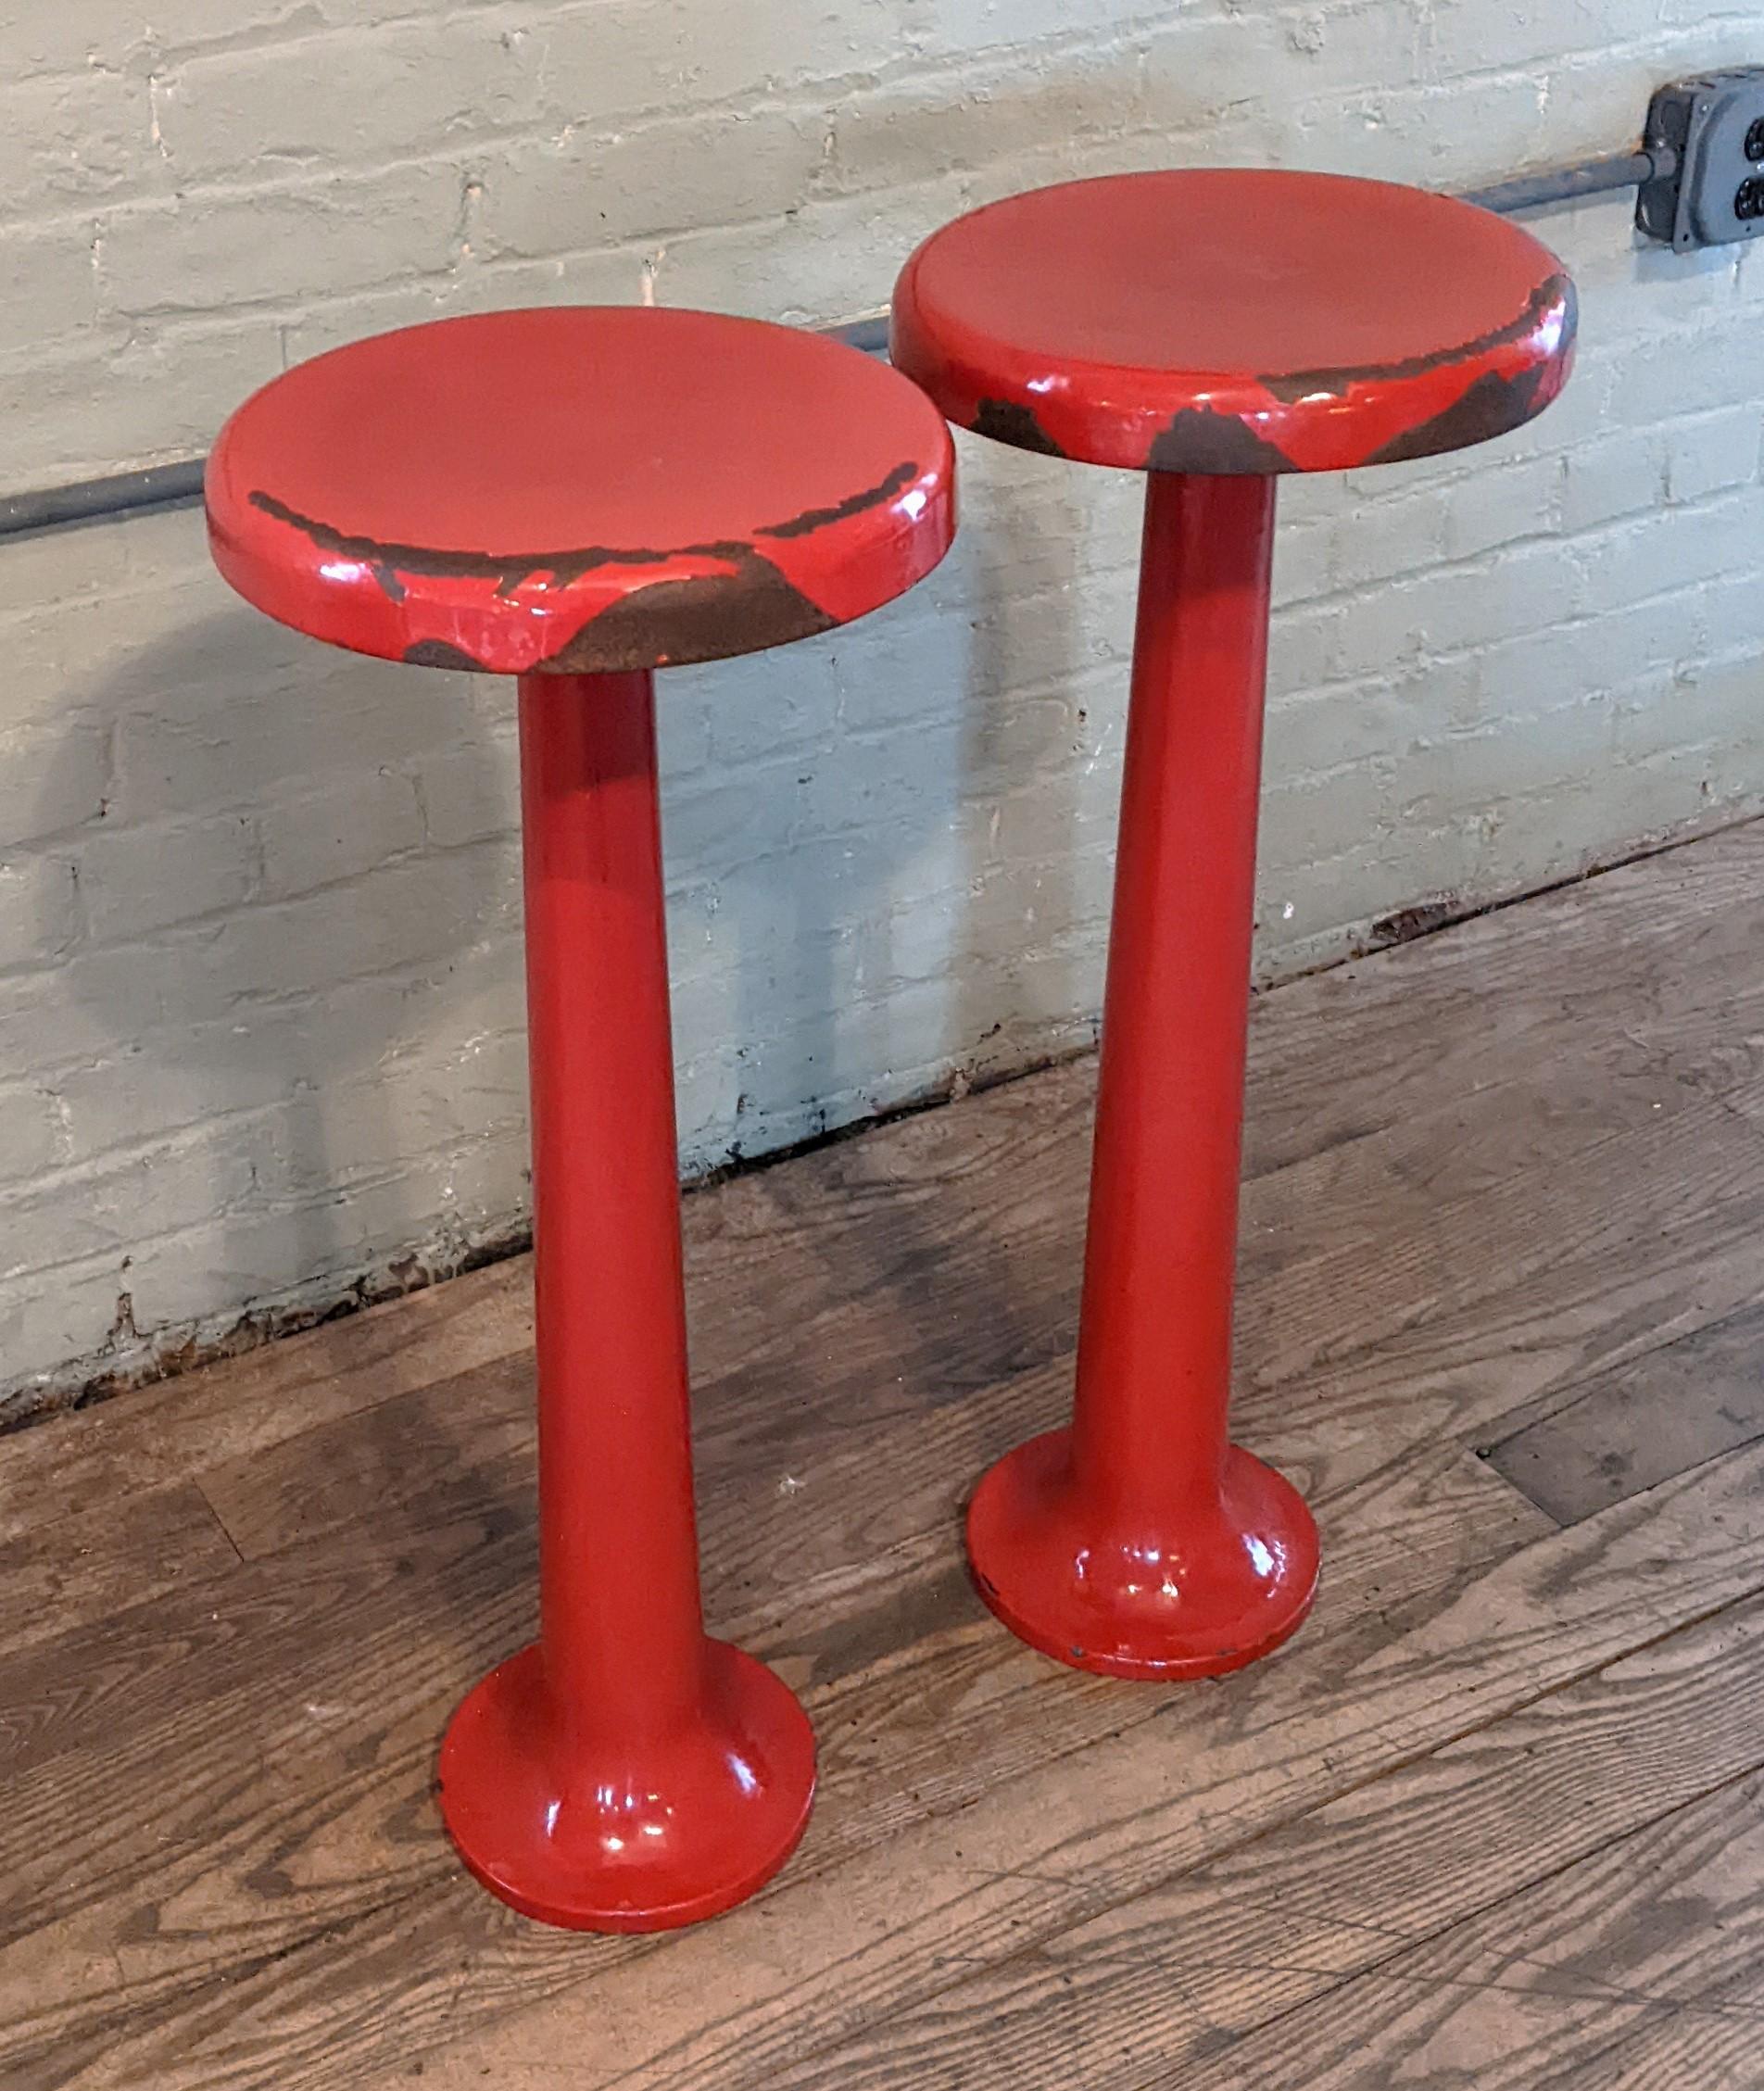 Vintage red counter stools

Seat height: 29 1/2